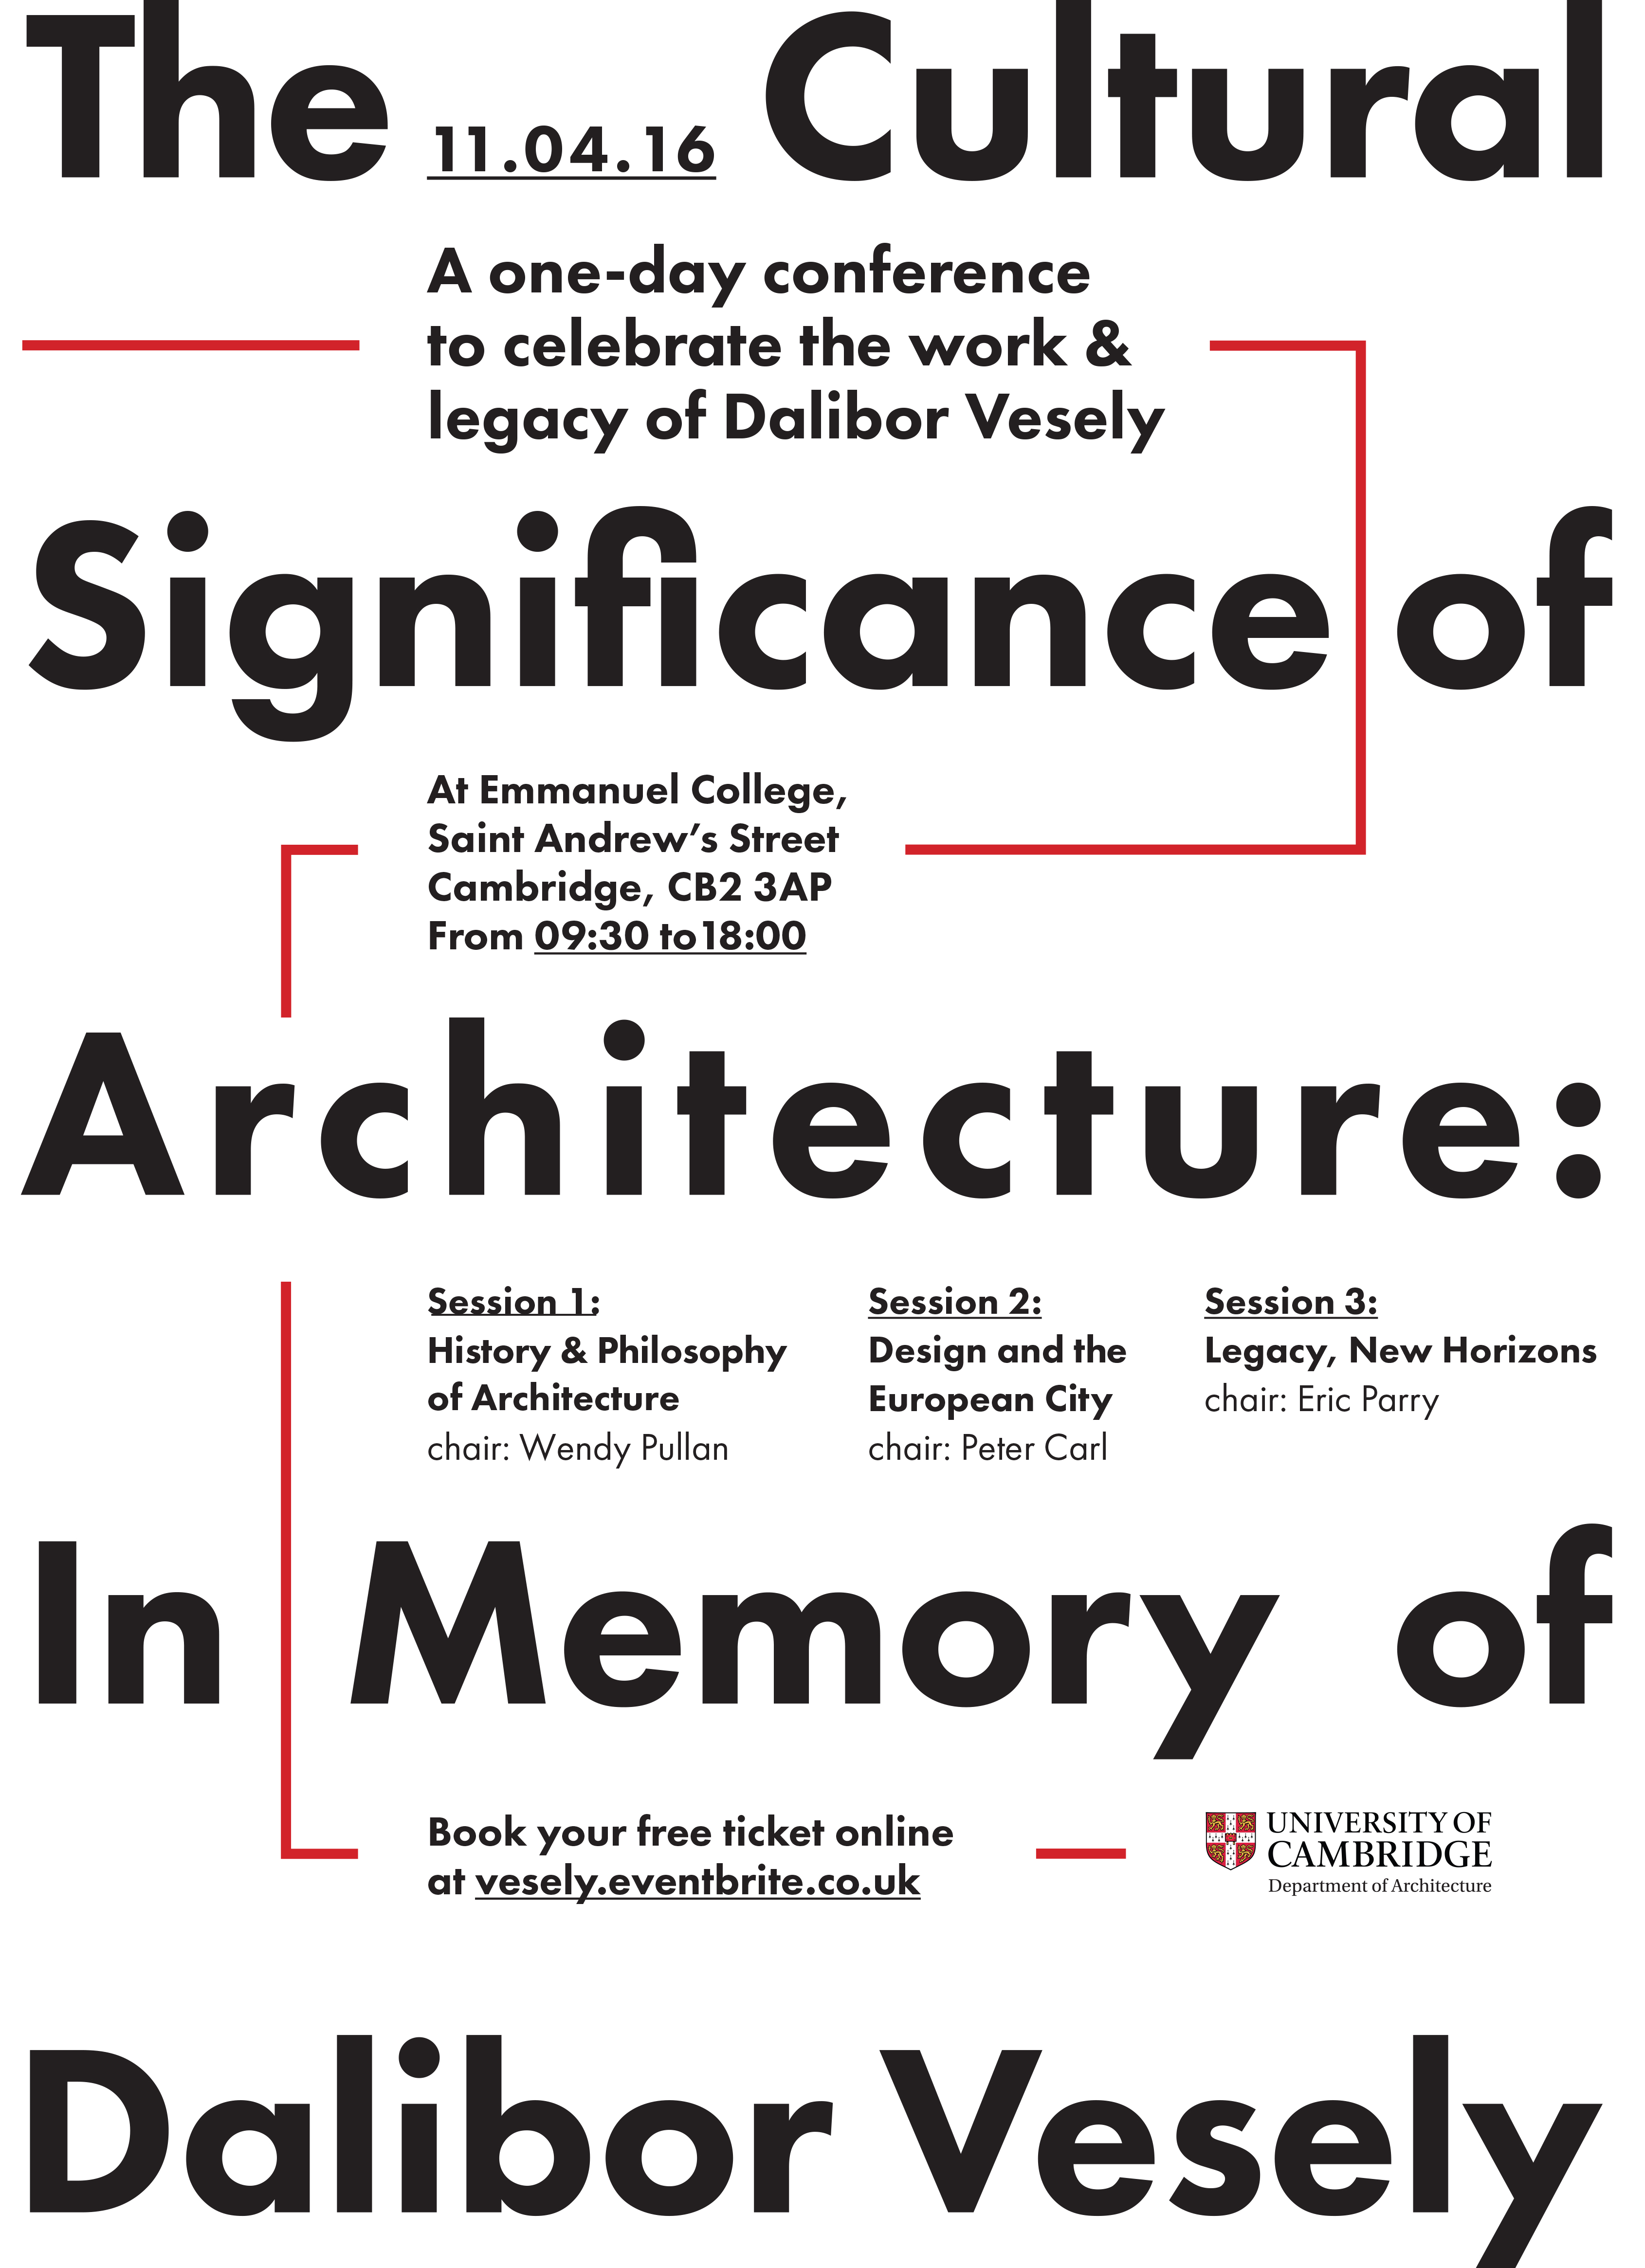 Dalibor Vesely Conference Poster